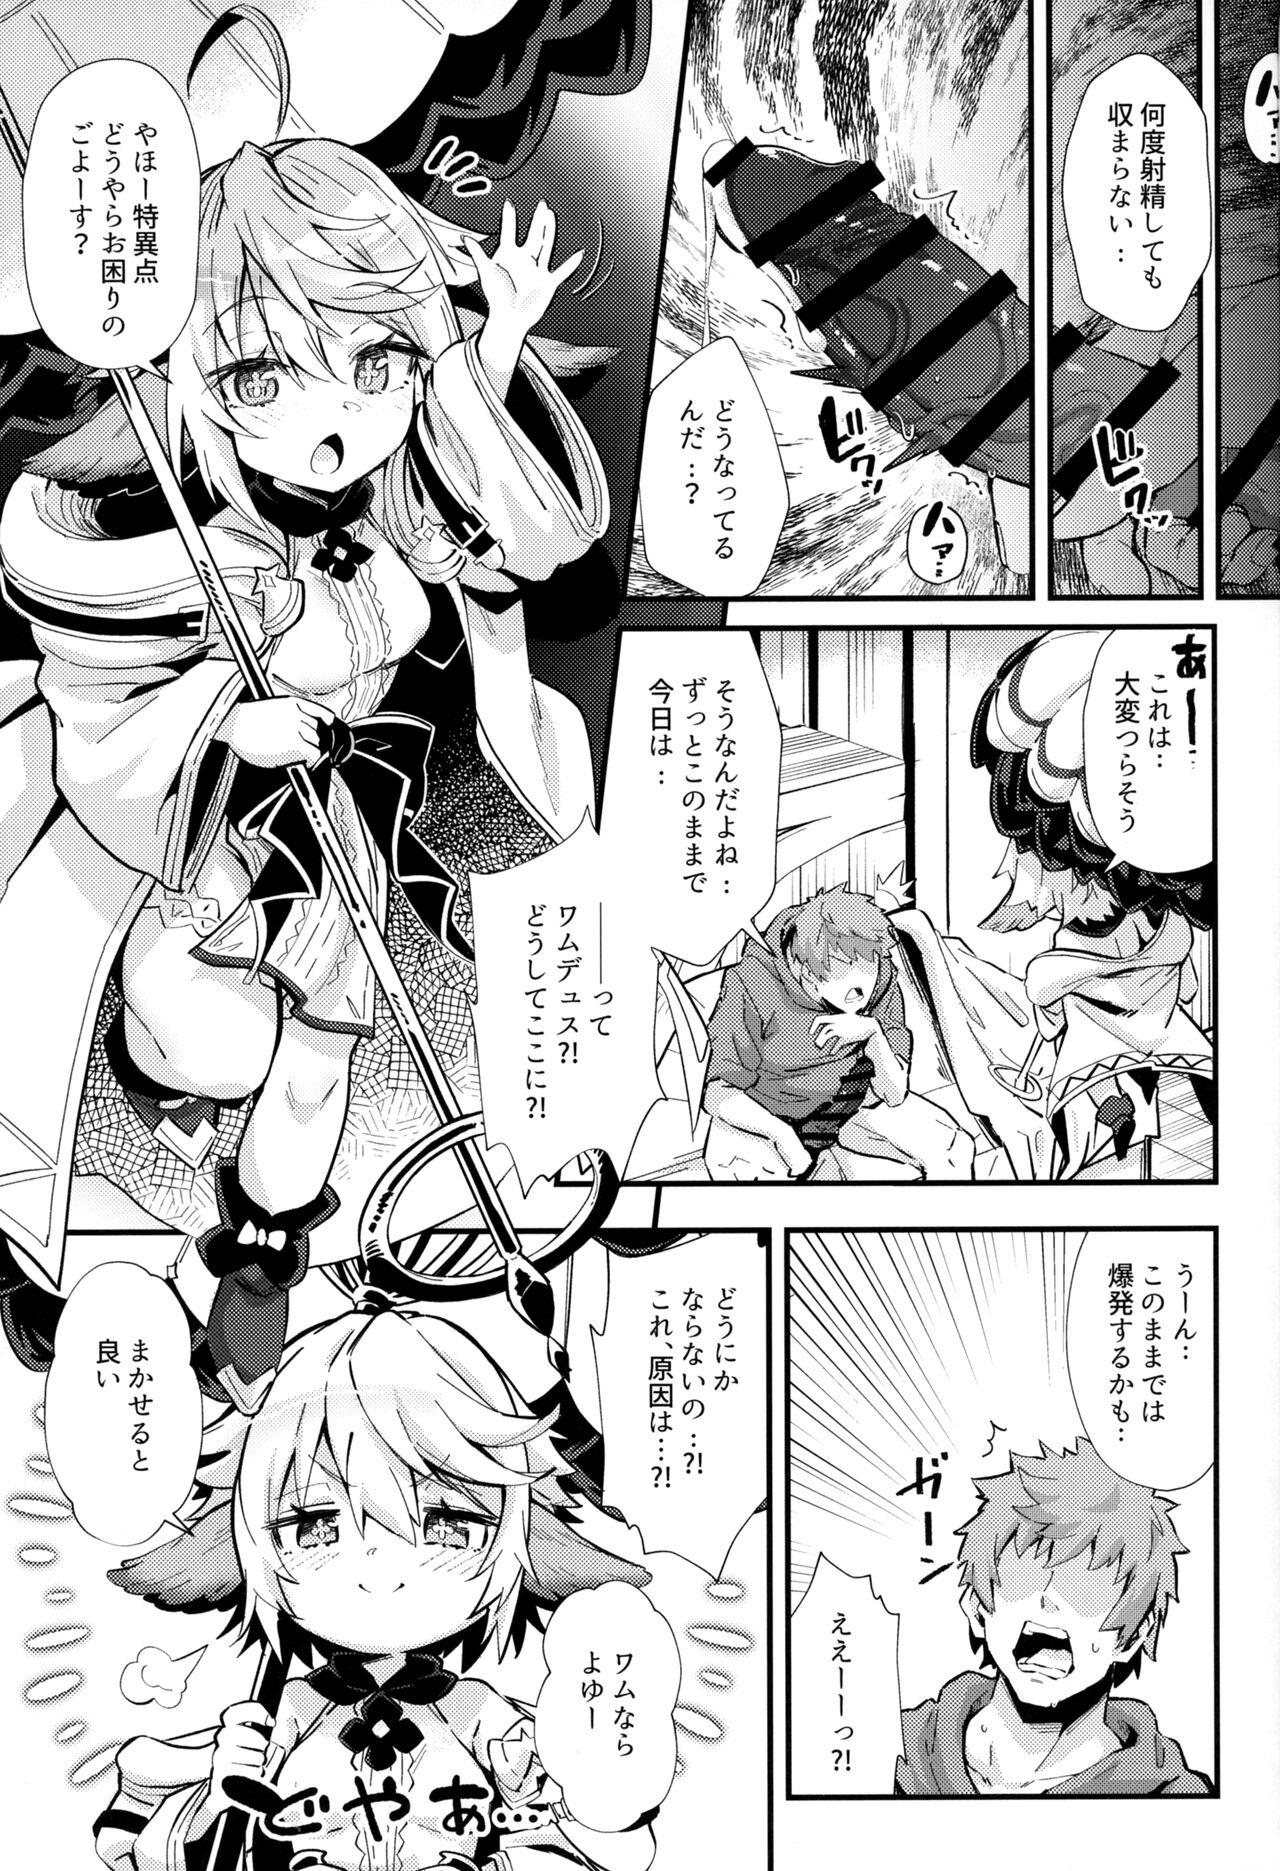 Missionary Position Porn 六竜灯儀・碧 - Granblue fantasy Gay - Page 2